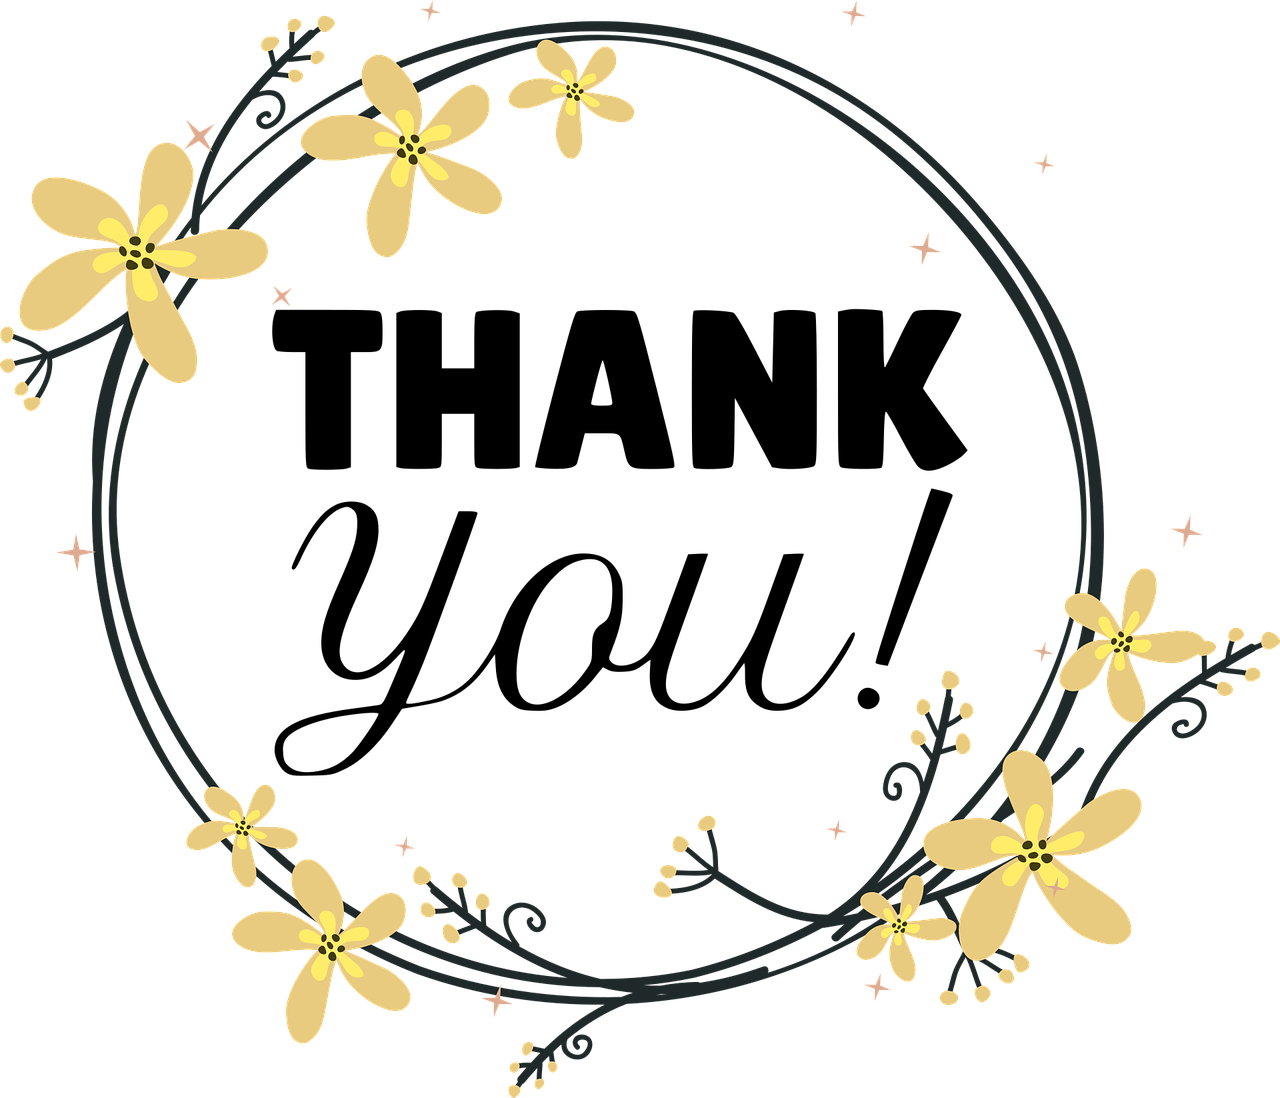 A circle outline decorated with yellow flowers, inside which it says "Thank You!"